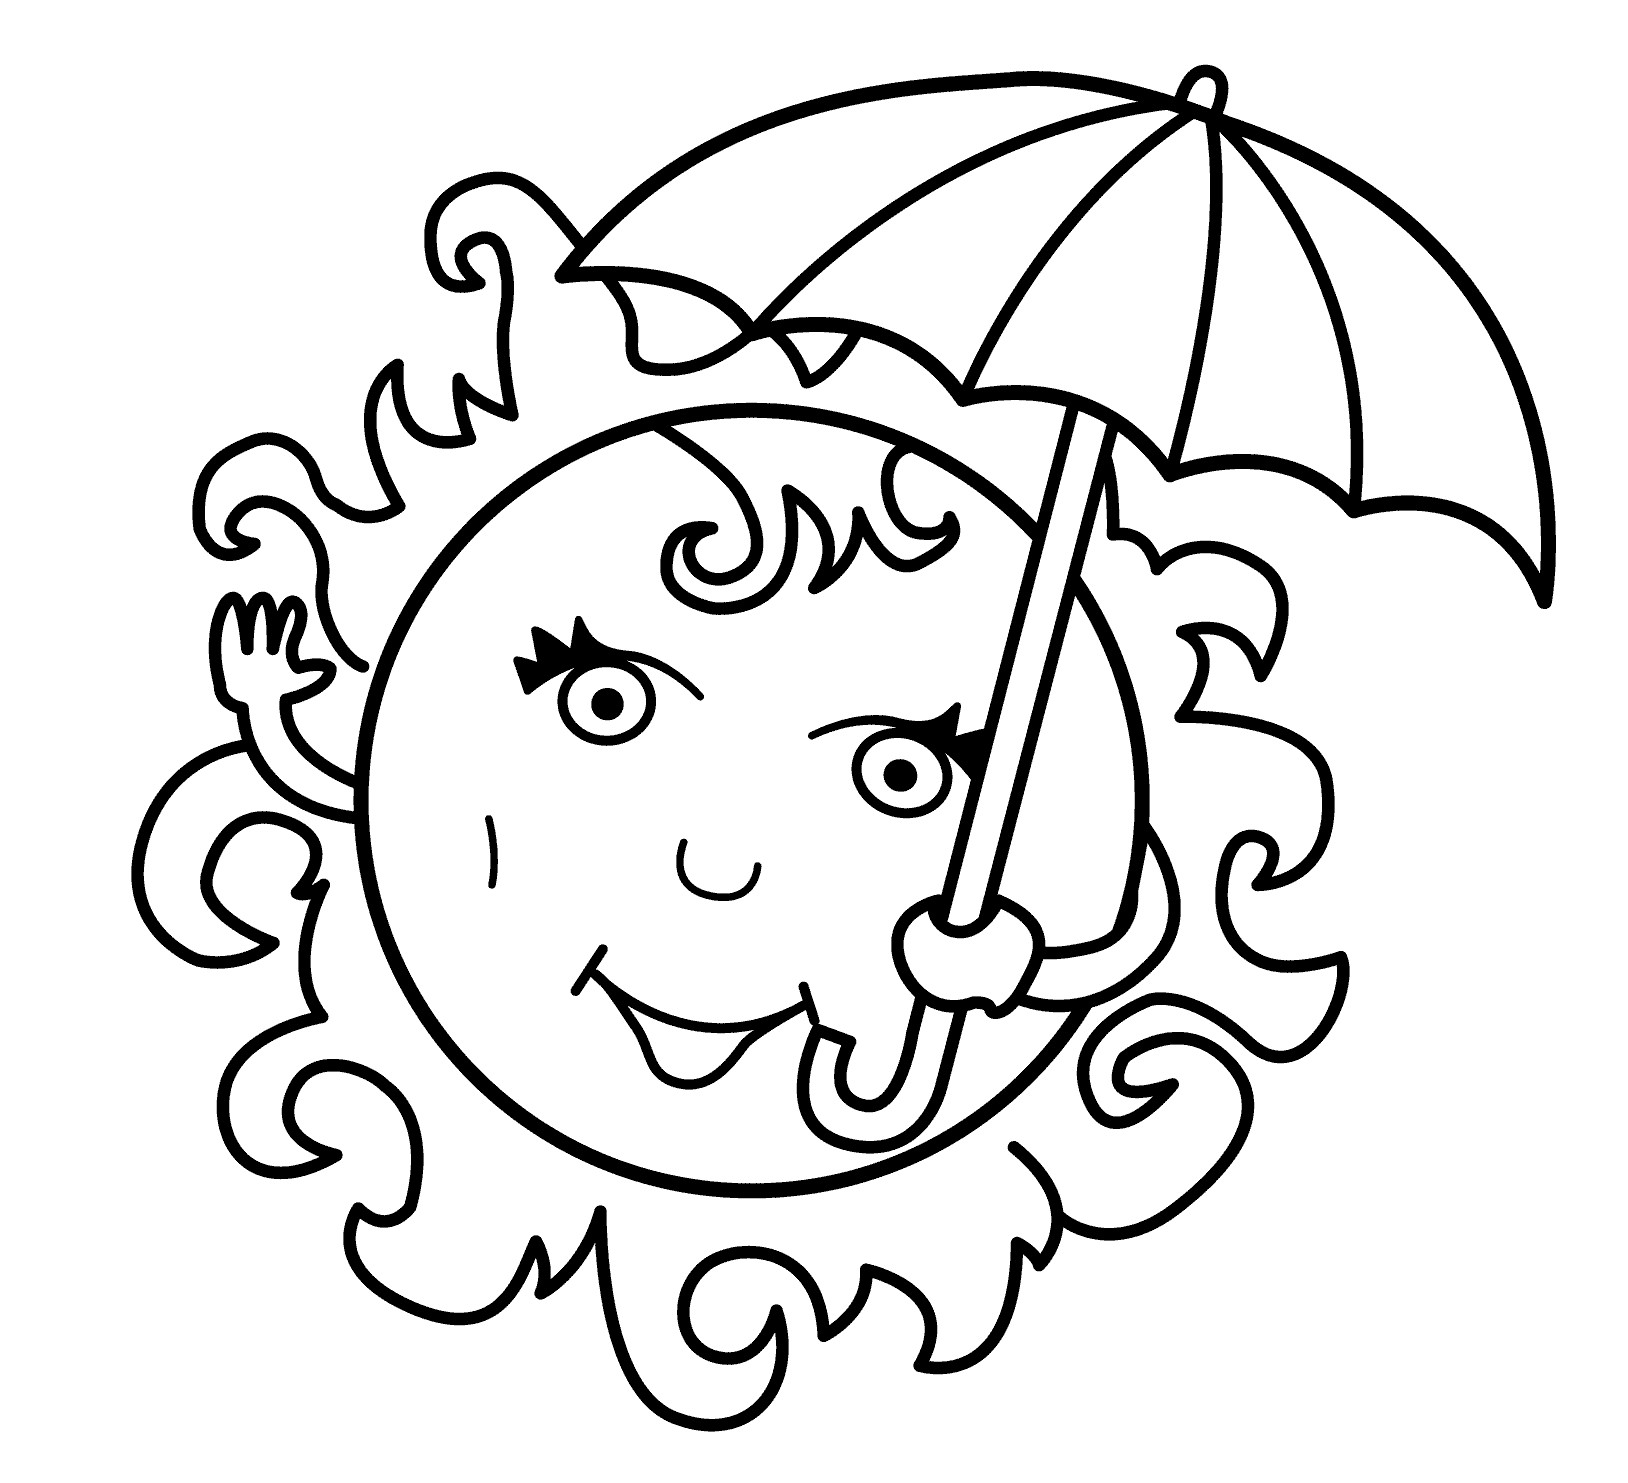 Printable Coloring Book For Kids Download
 Download Free Printable Summer Coloring Pages for Kids